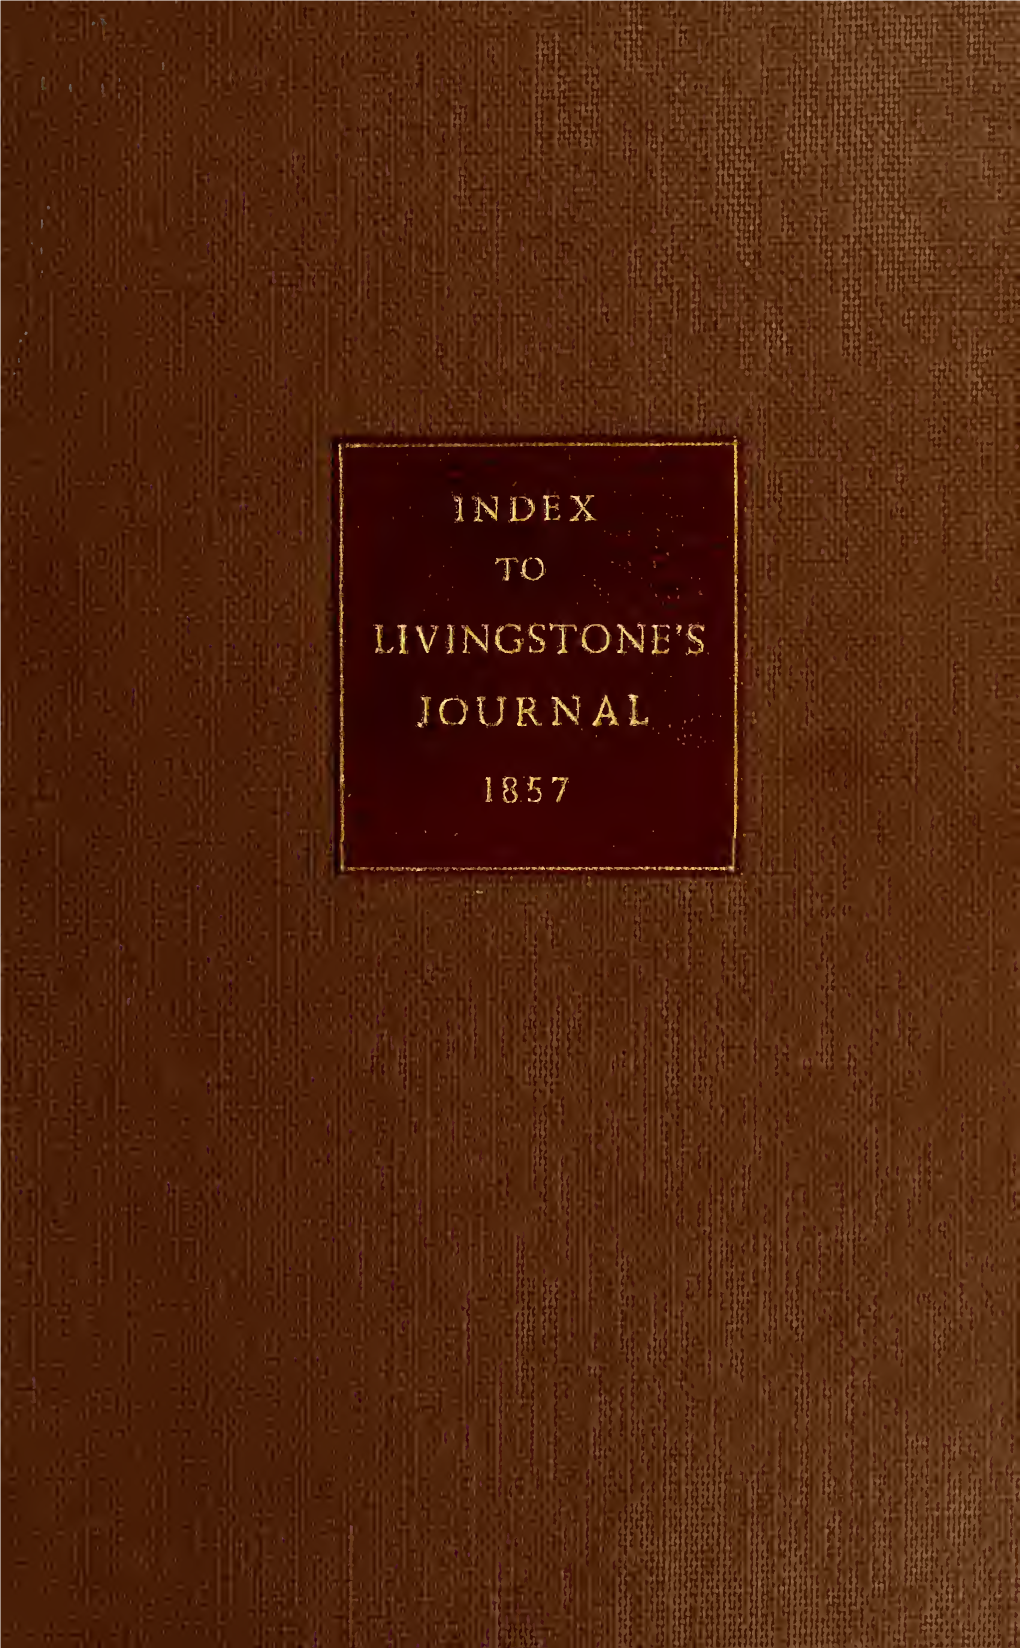 Index to Livingstone's Journal